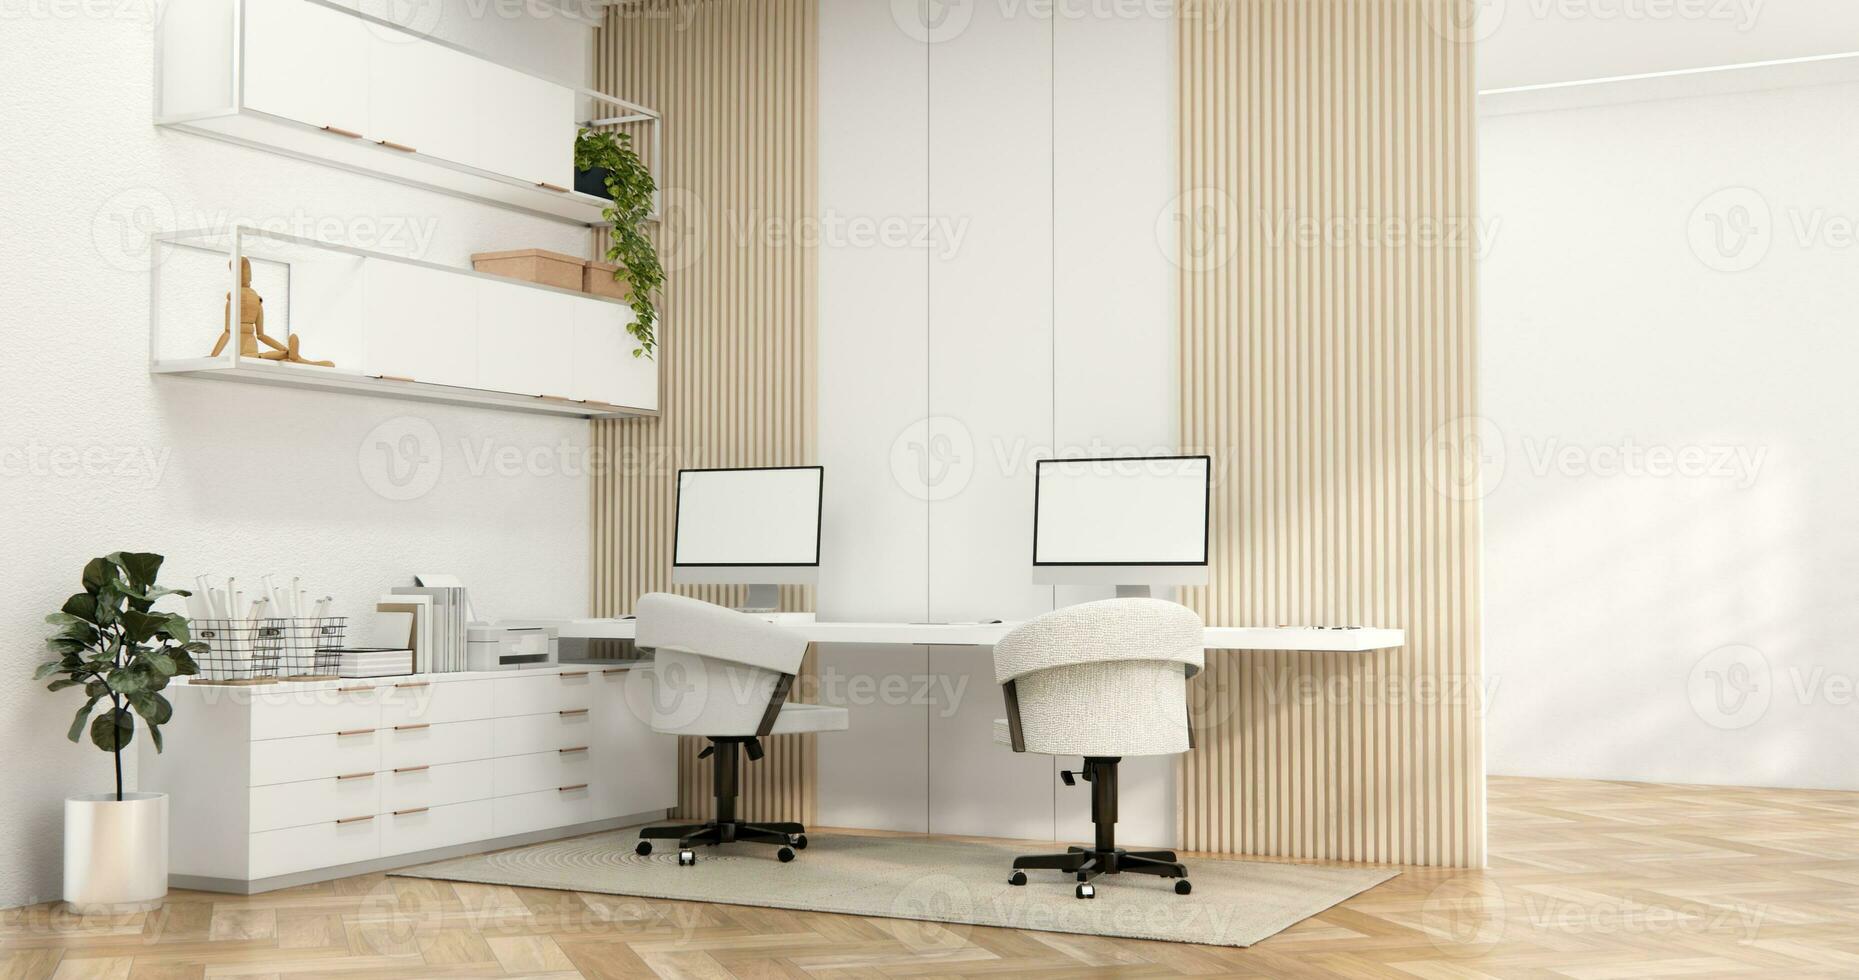 The interior Computer and office tools on desk room muji style interior design. photo